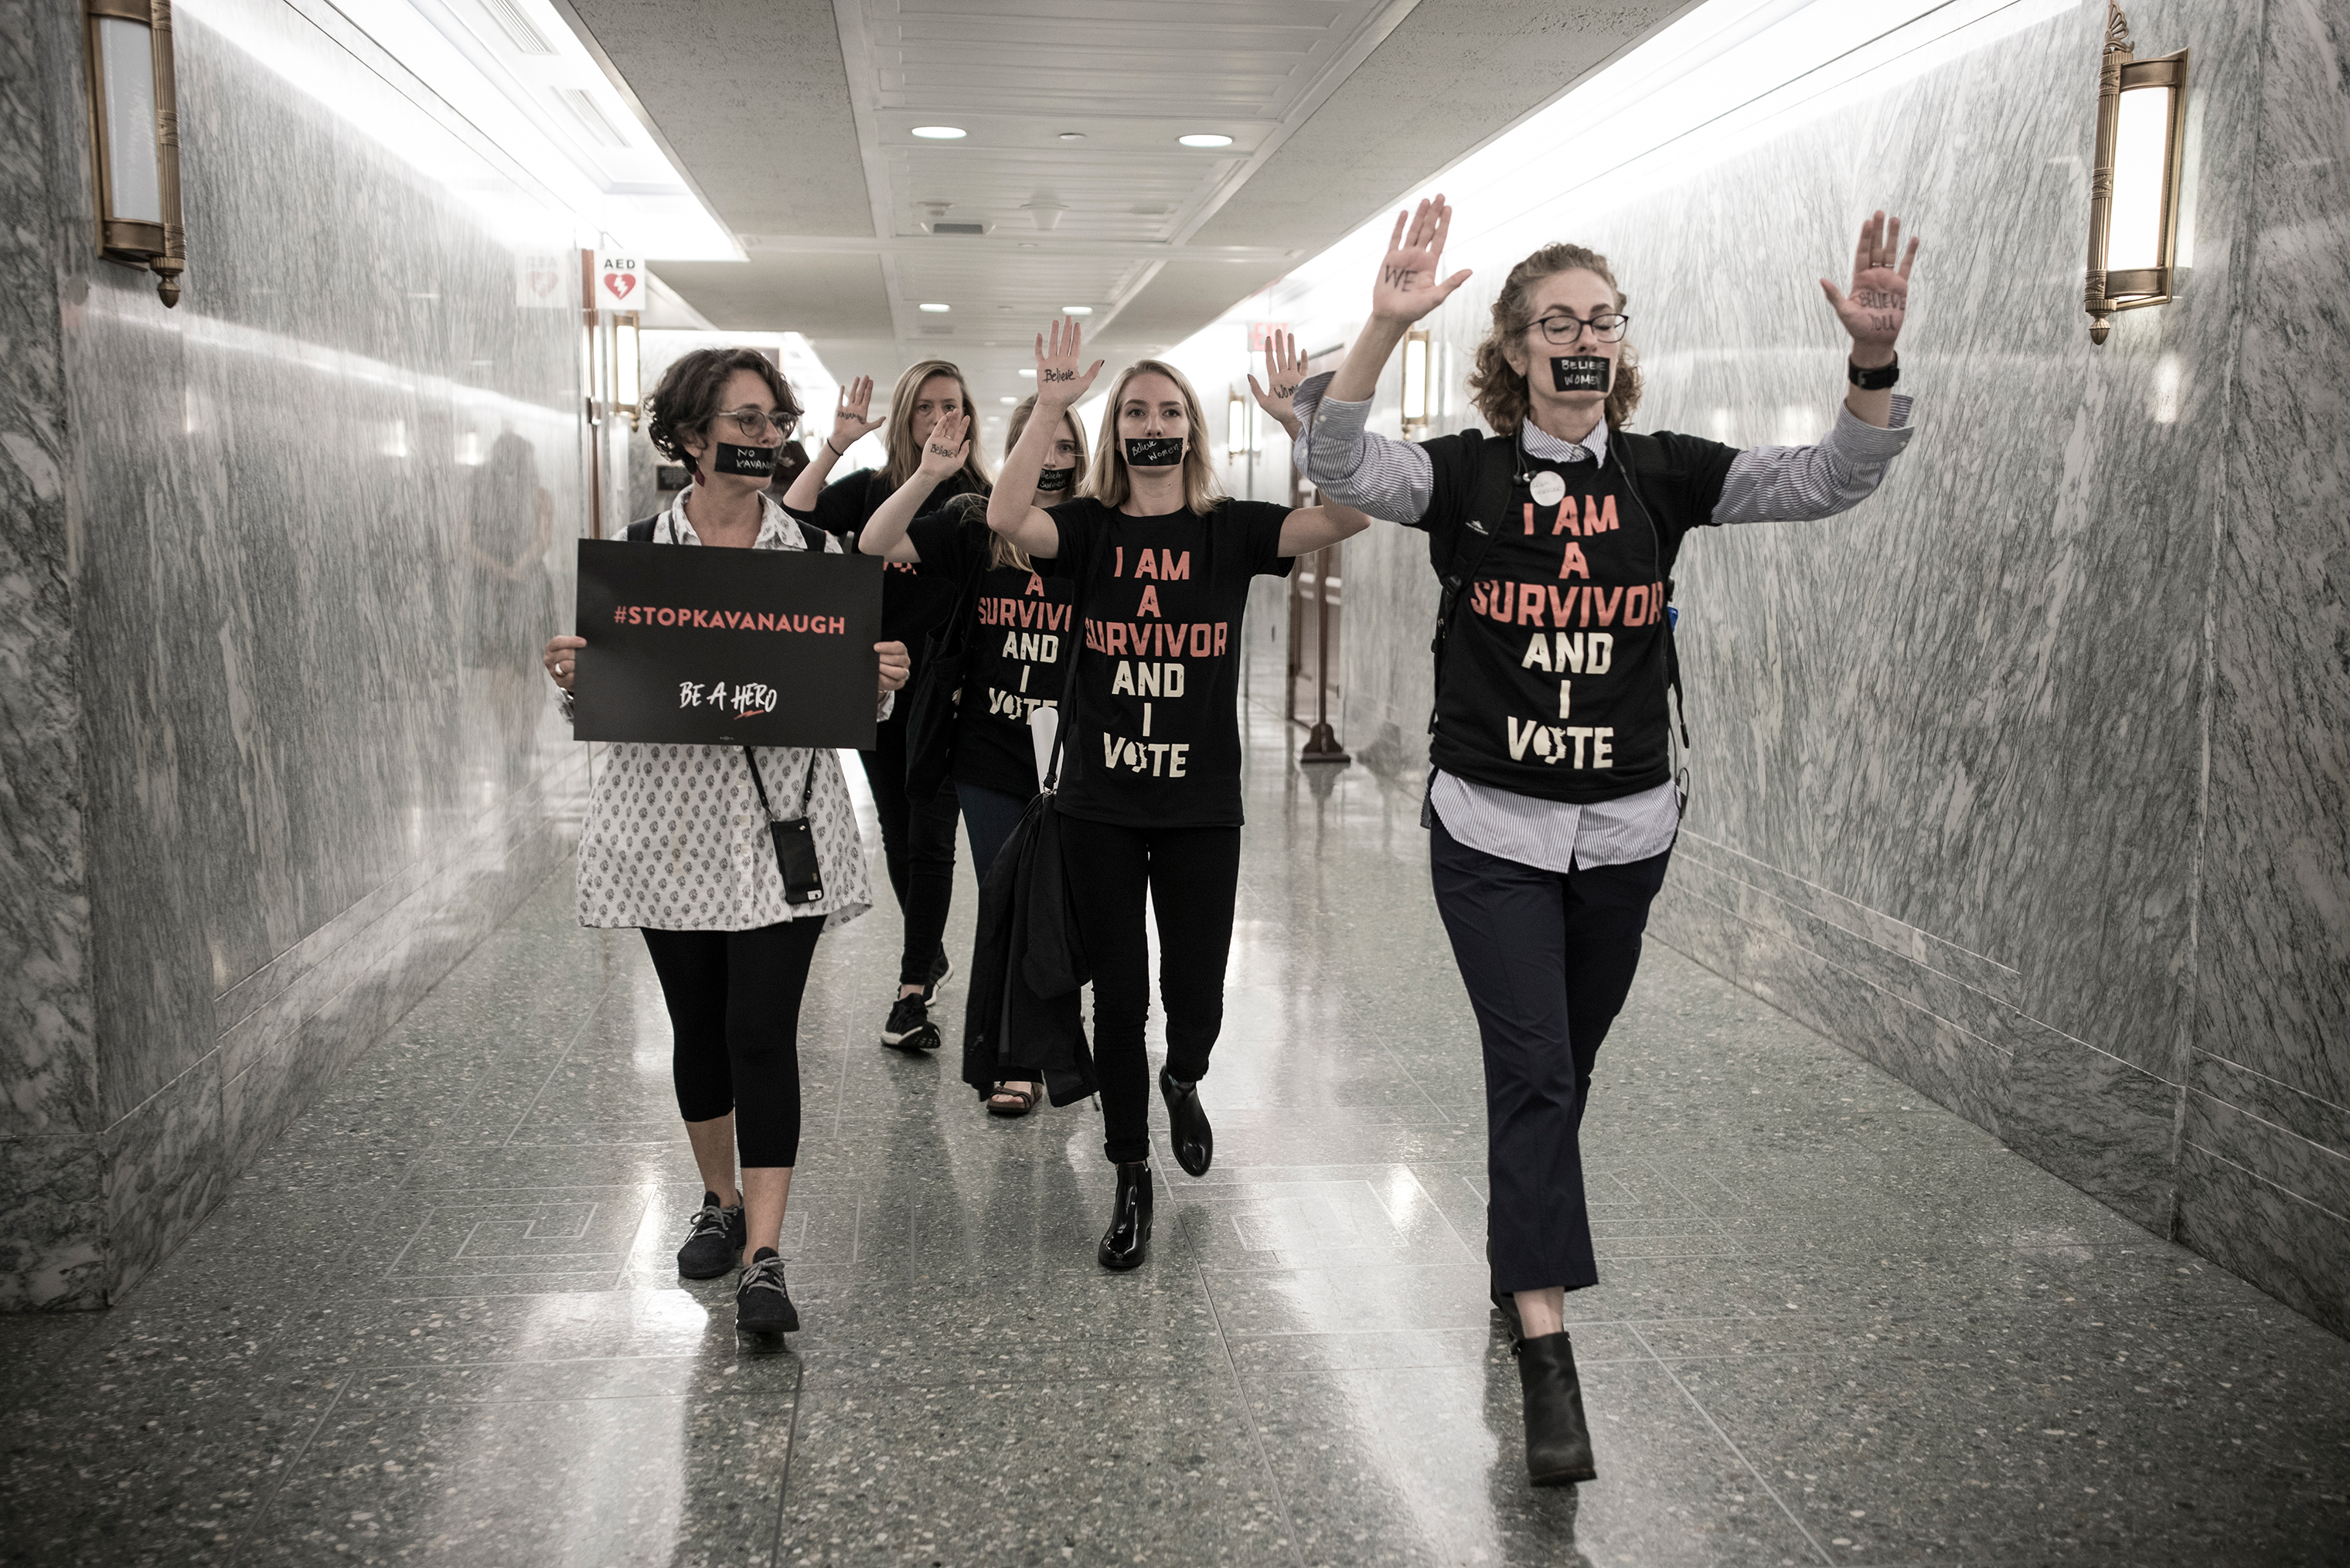 Protesters walk through the hallway of the Dirksen Senate Office Building on Sept. 27. (David Butow—Redux for TIME)